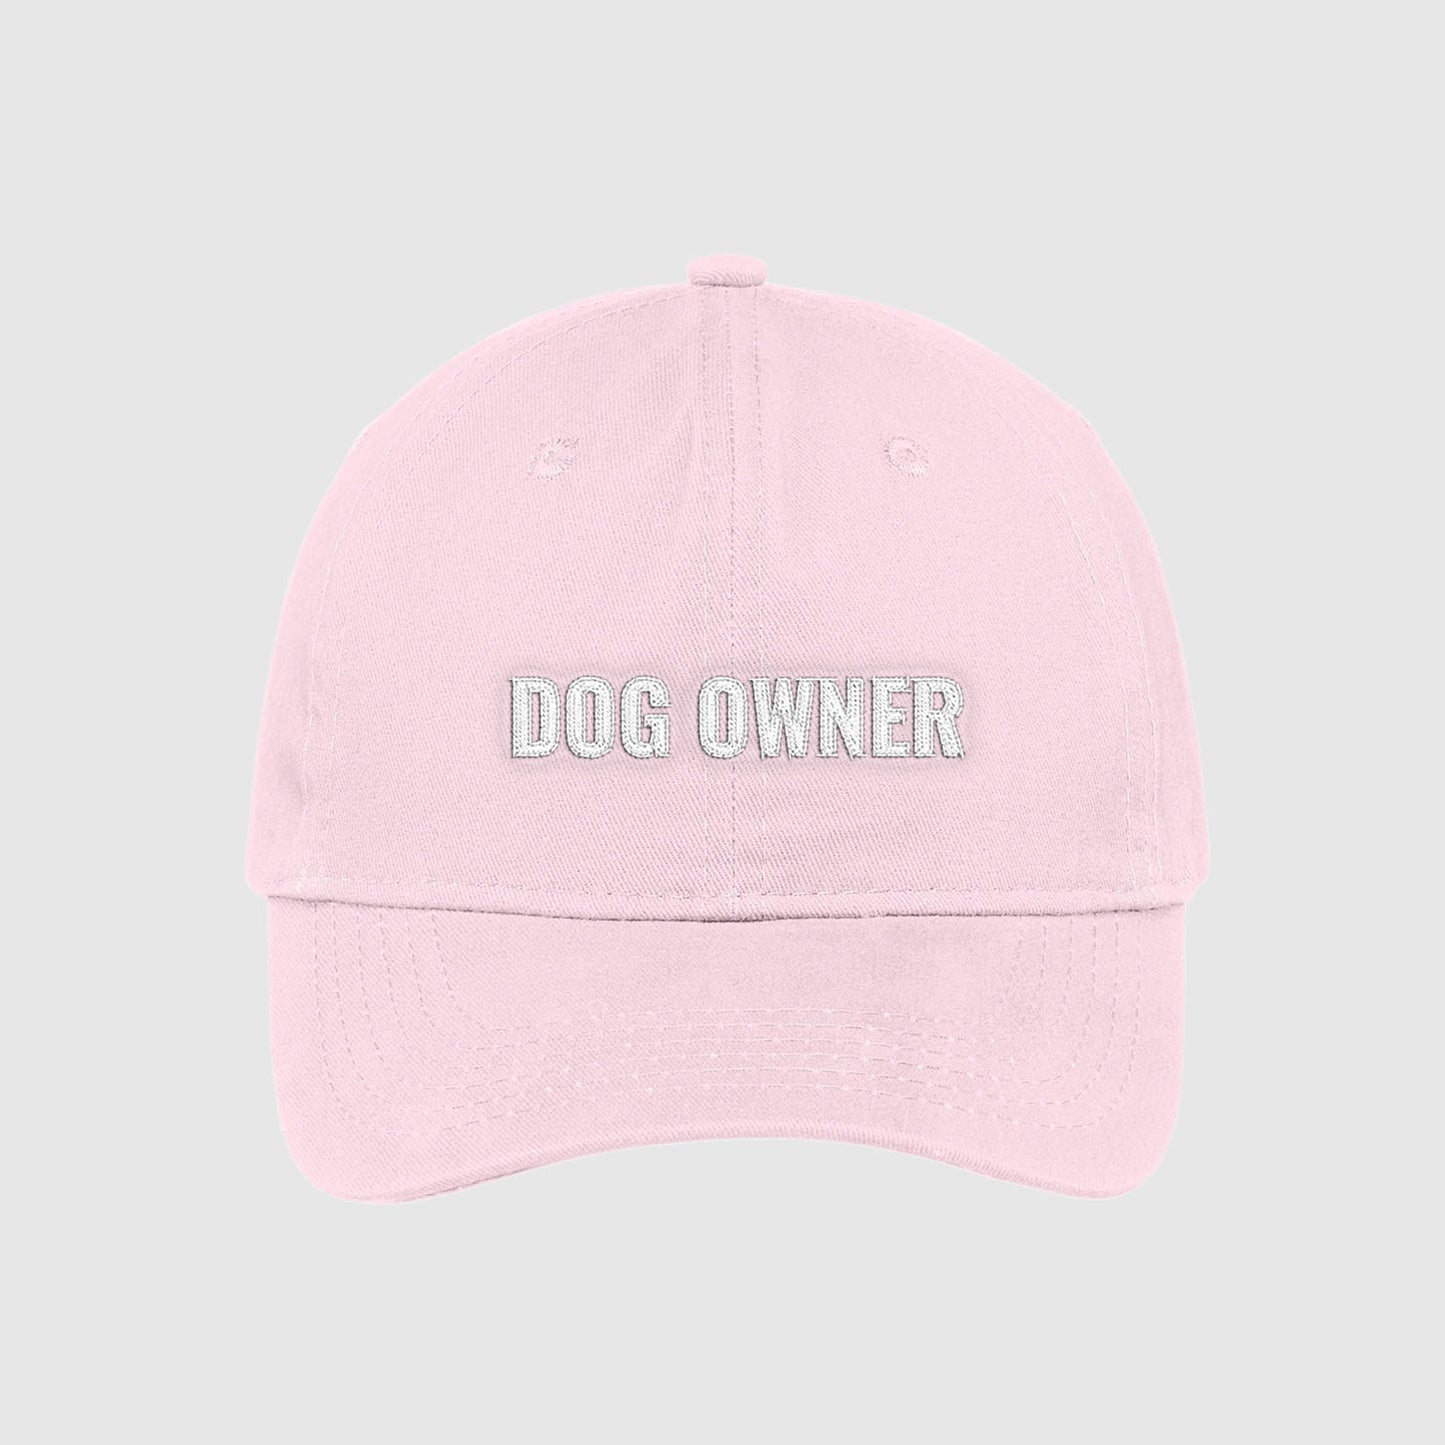 Blush light pink dad hat with Dog Owner embroidered on the front with white thread.